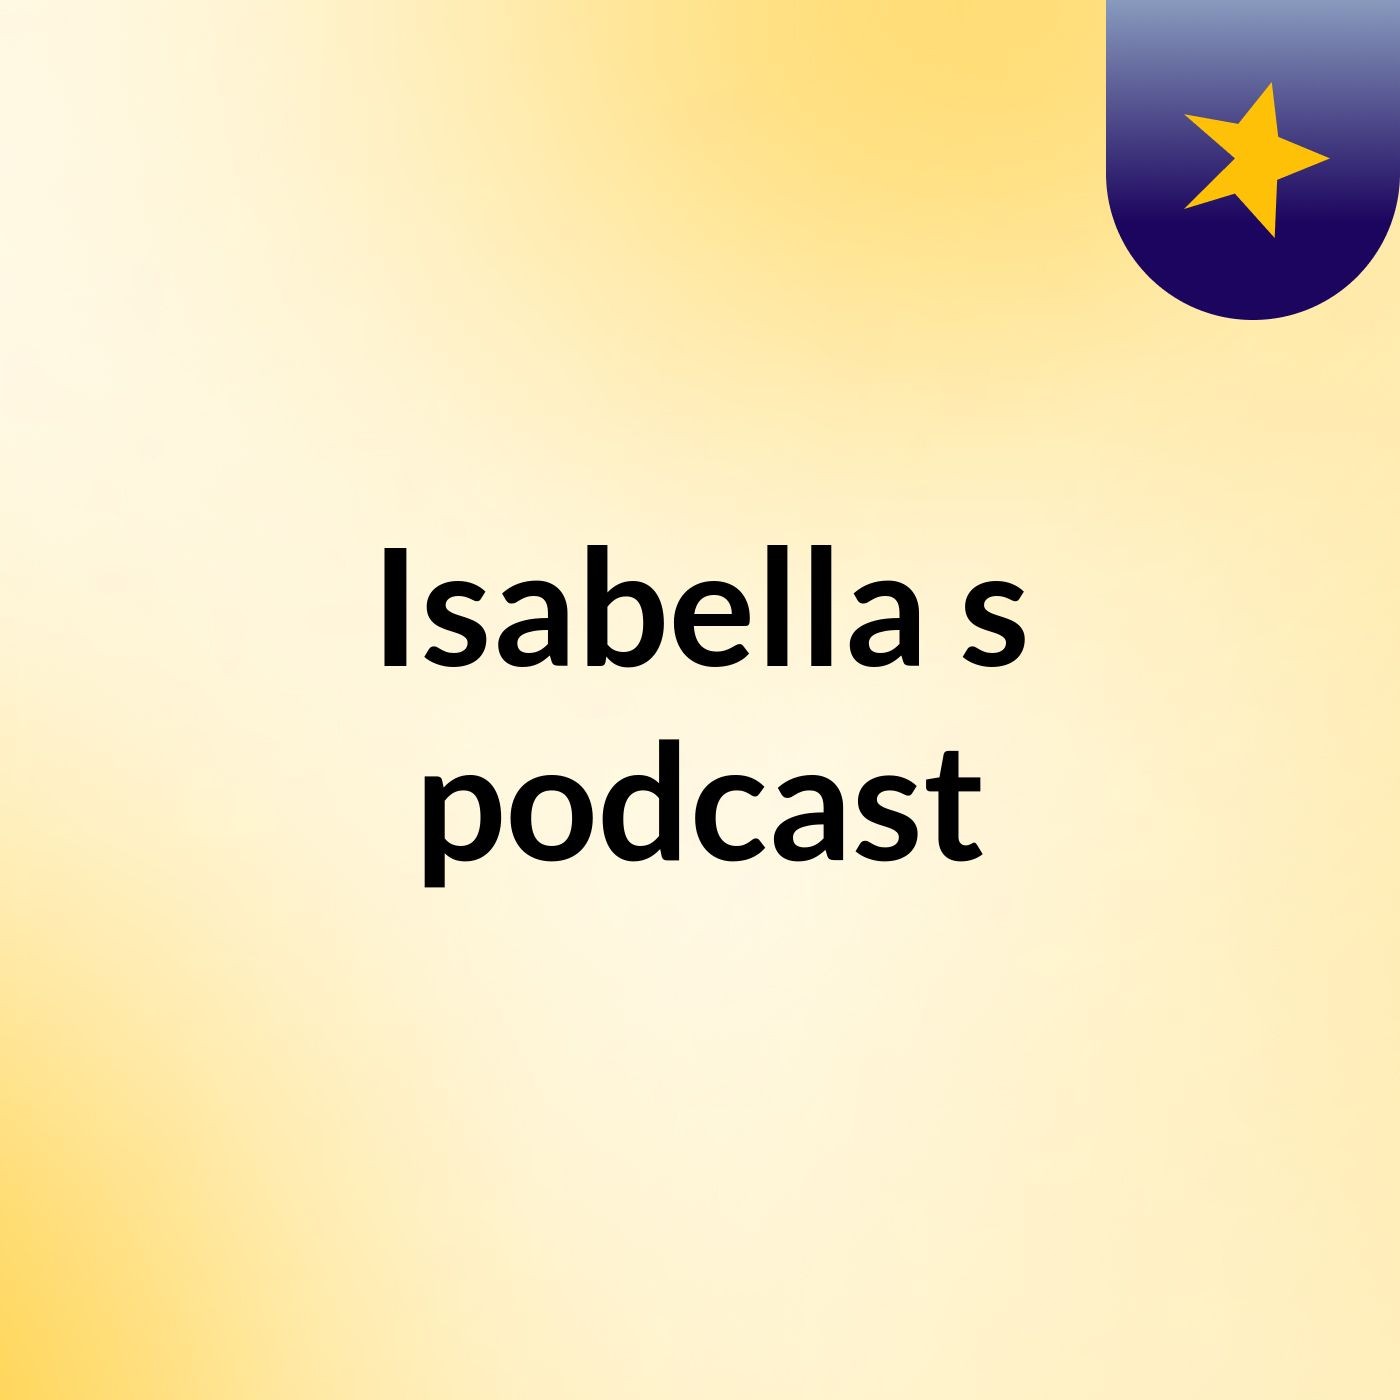 Isabella's podcast